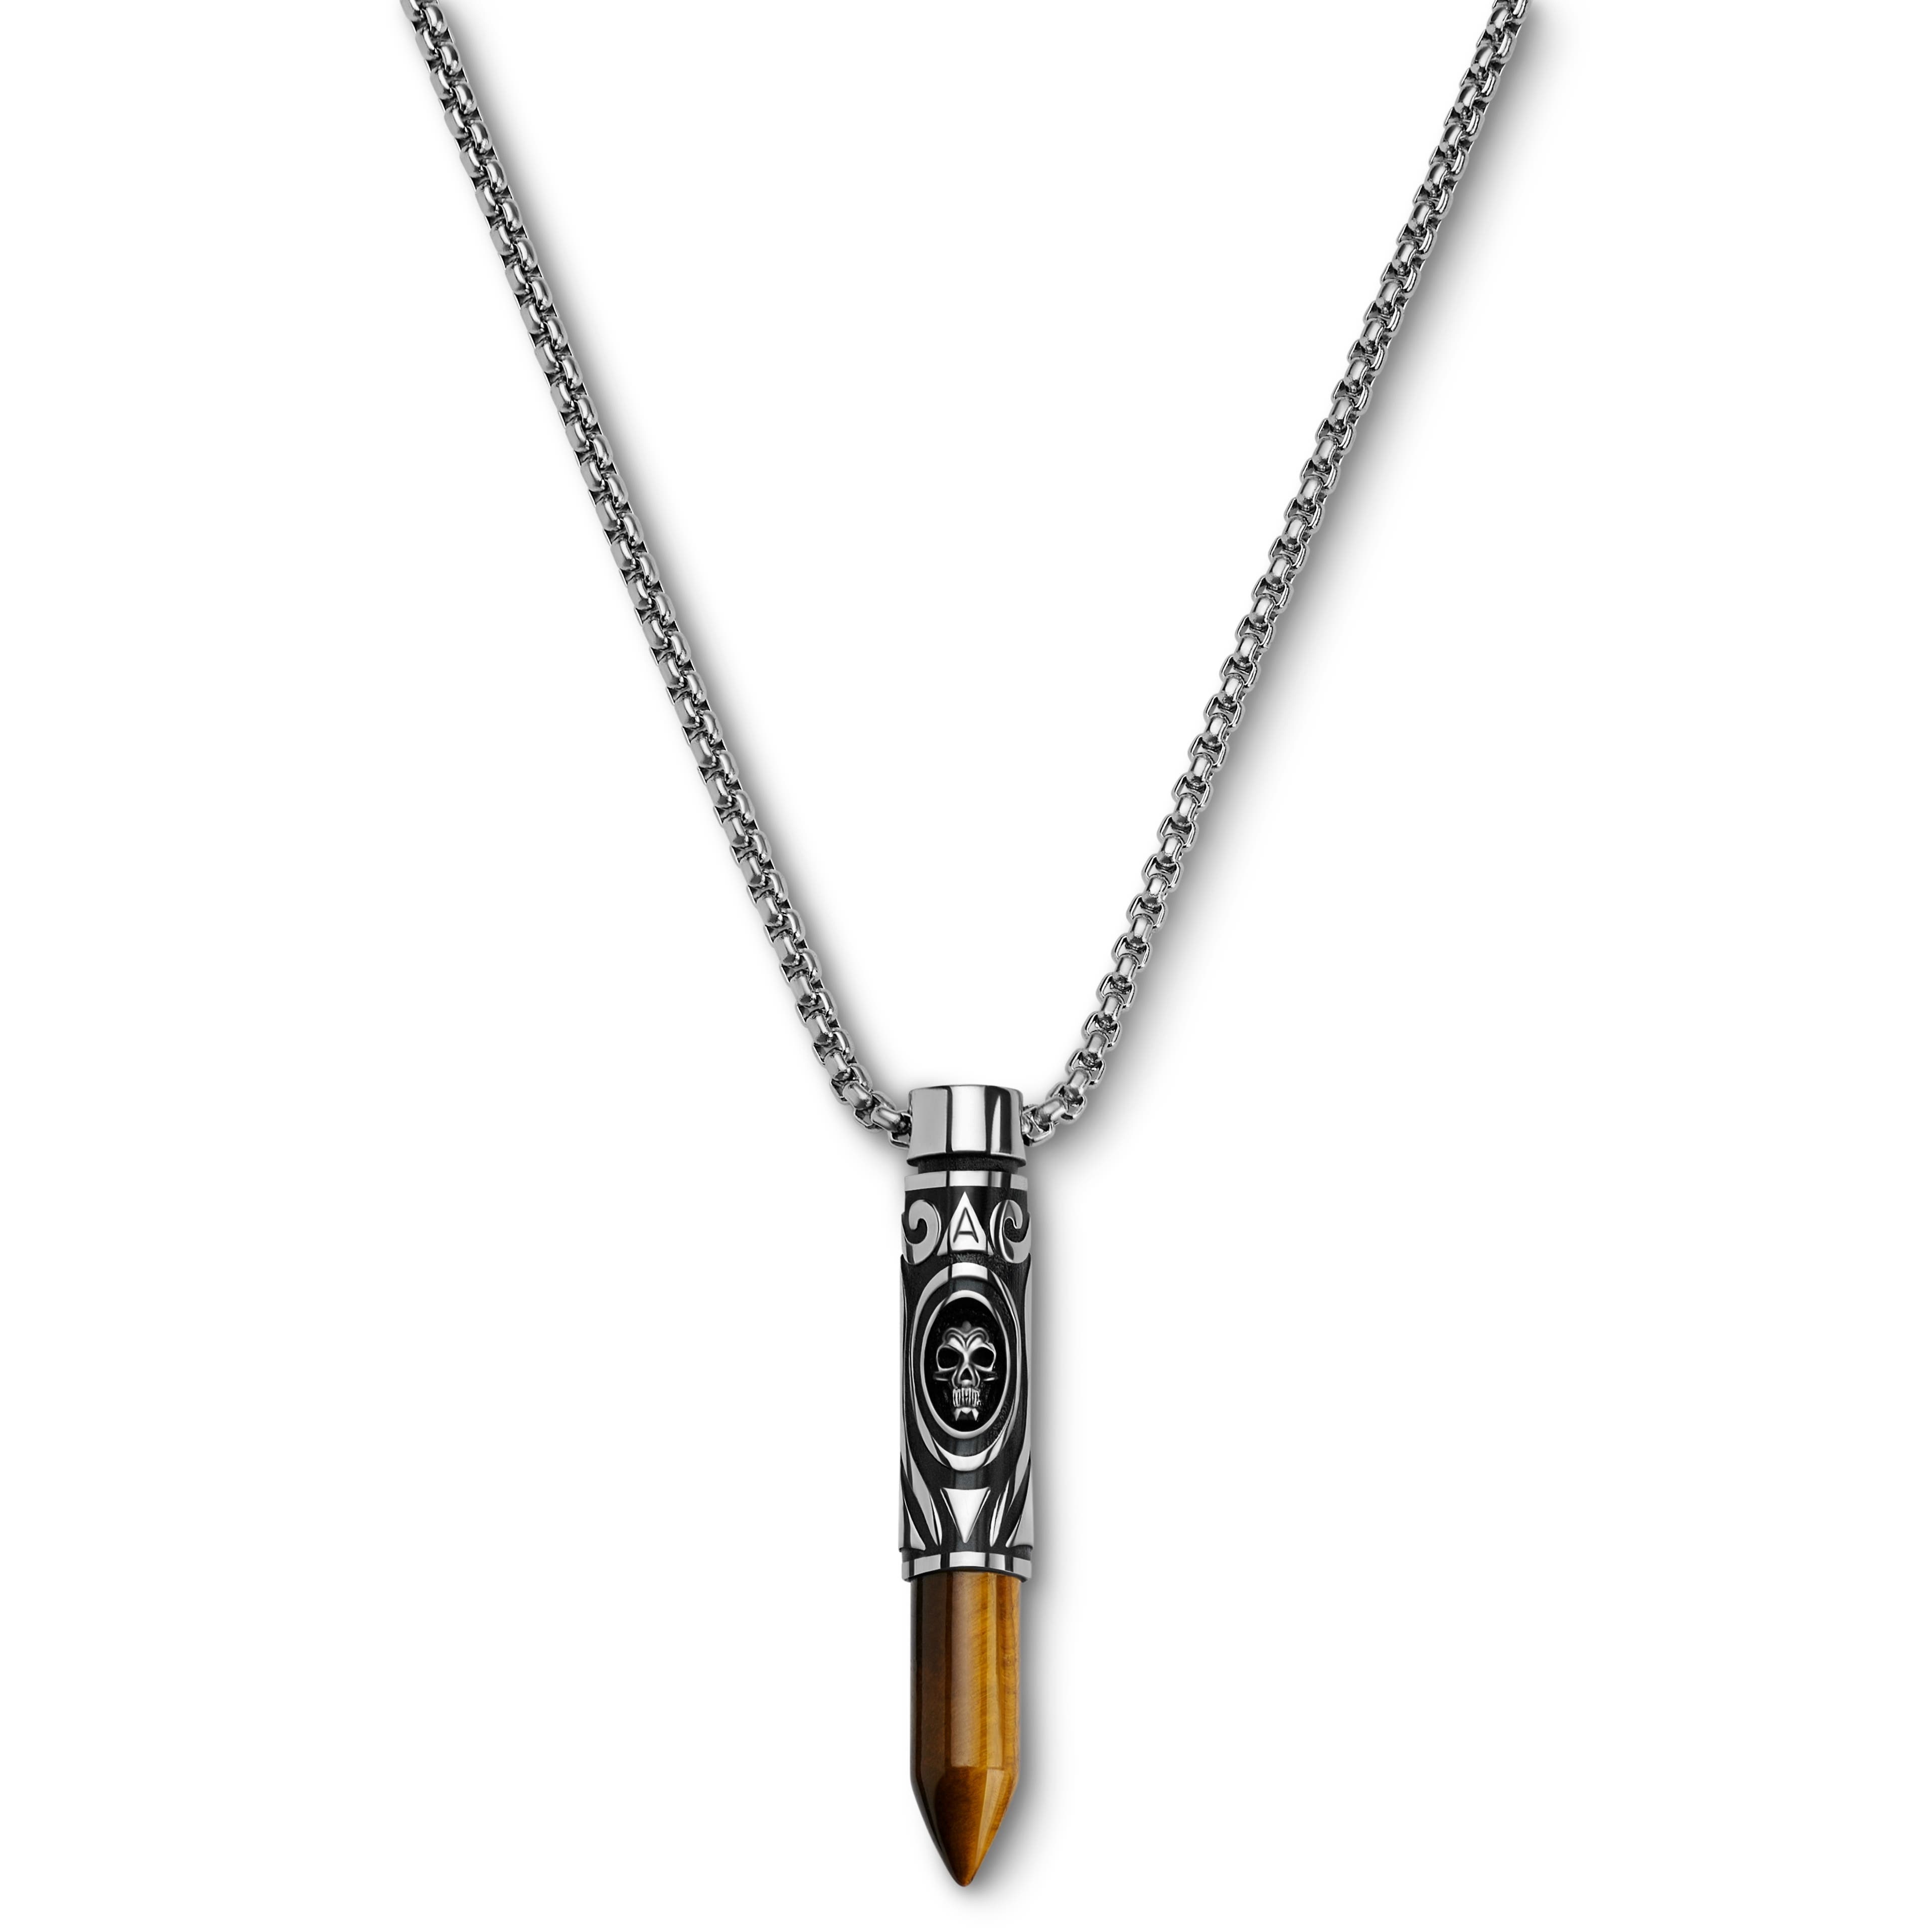 Rico | Silver-tone Stainless Steel & Yellow Tiger's Eye Bullet Necklace